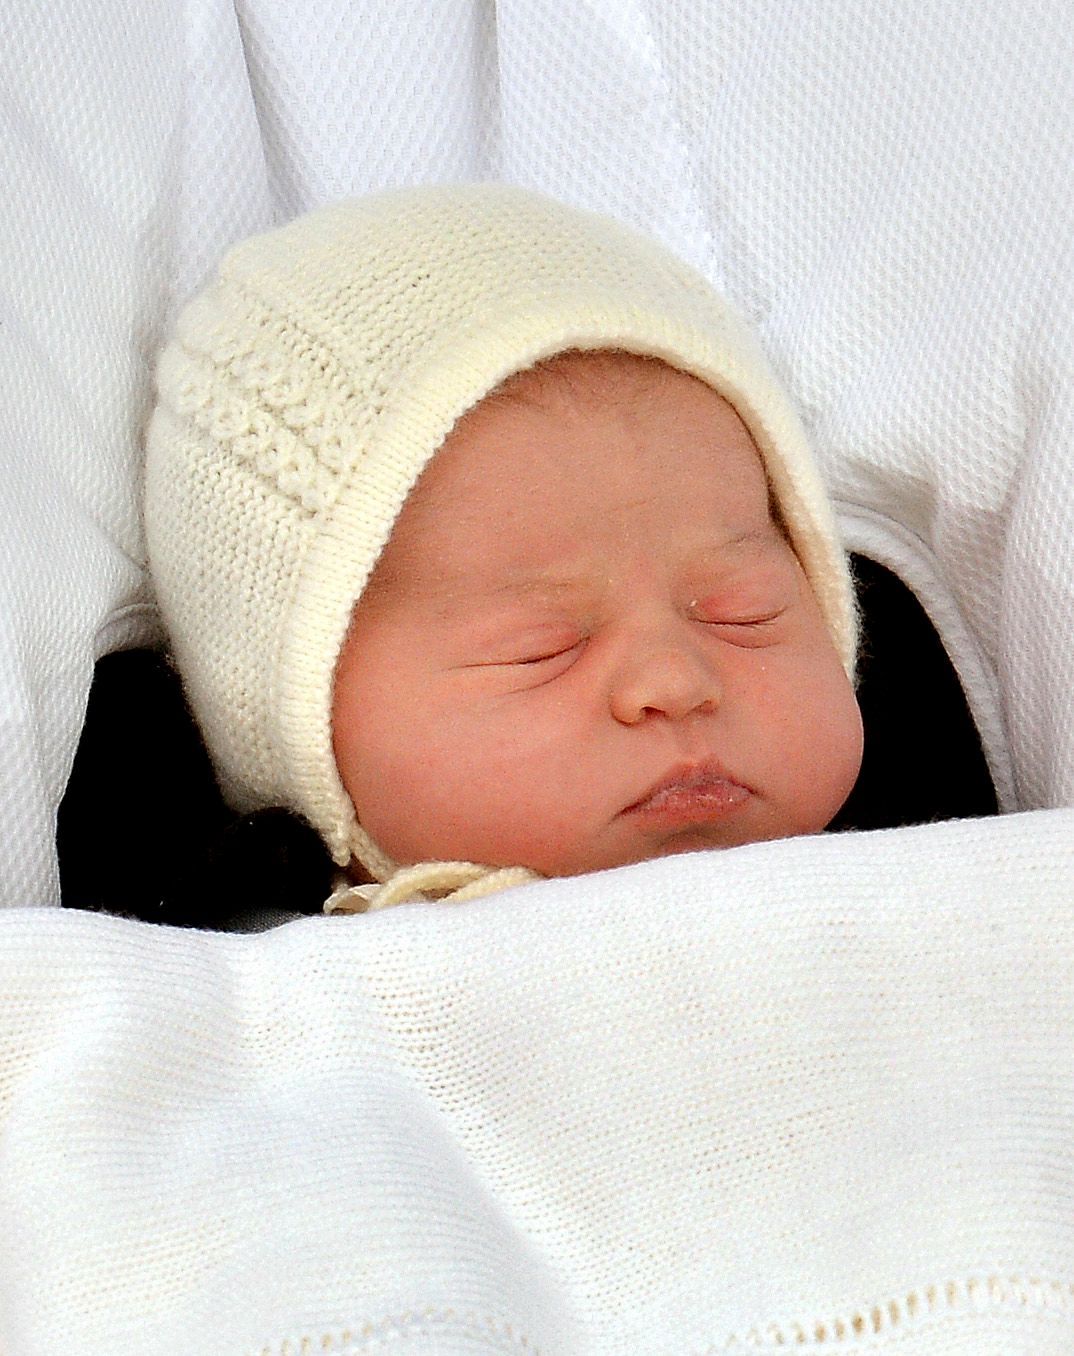 The baby daughter of Britain's Prince William and Catherine, Duchess of Cambridge sleeps as she is carried from the Lindo Wing of St Mary's Hospital in London